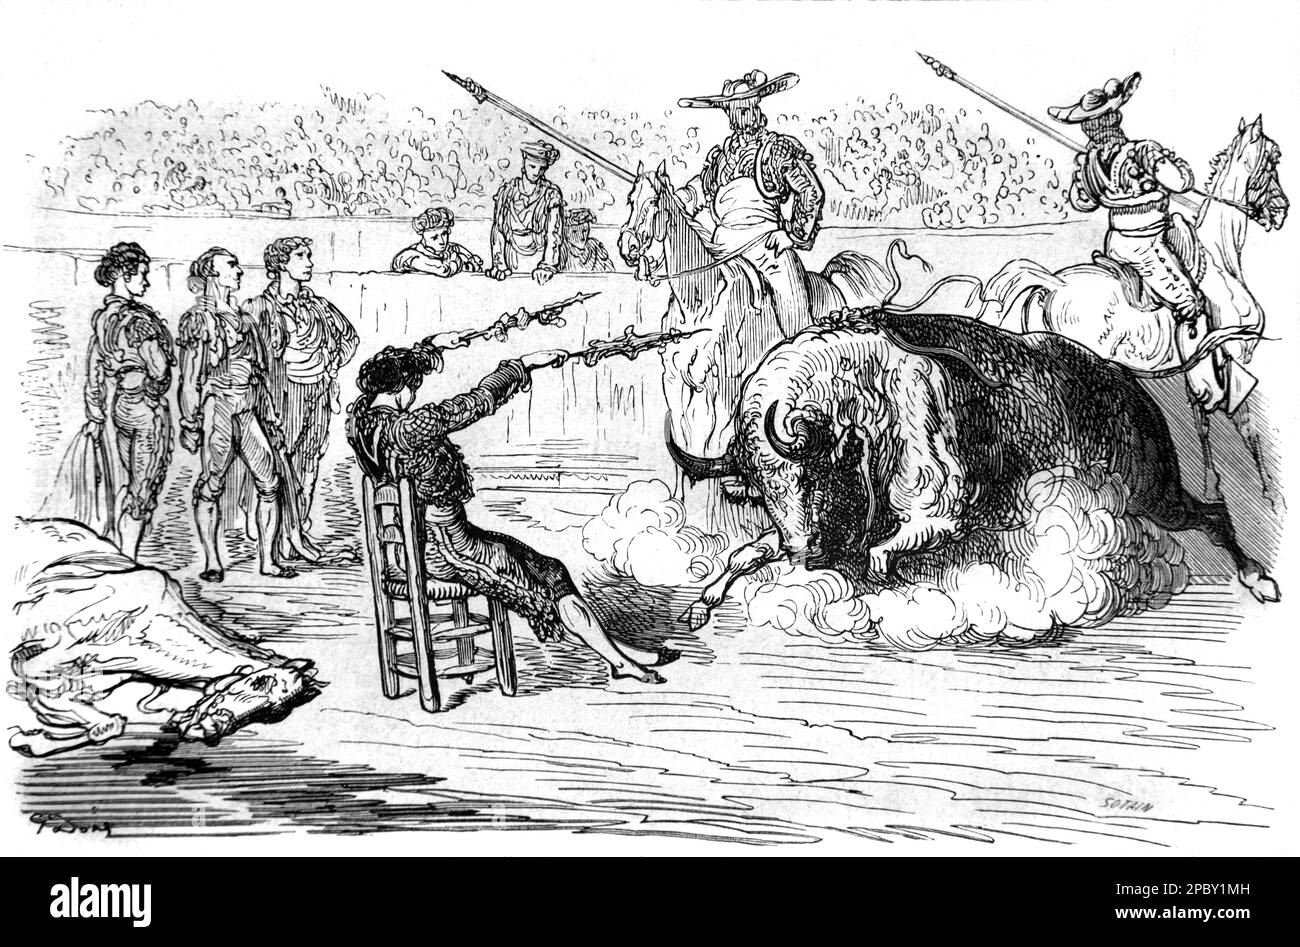 Celebrated Spanish Matador or Bullfighter El Gordito, Antonio Carmona y Luque (1838-1920) and Picadors, or Horse-mounted Bullfighters in Bullfight or Corrida Spain. Vintage or Historic Engraving or Illustration by Gustave Doré 1862 Stock Photo